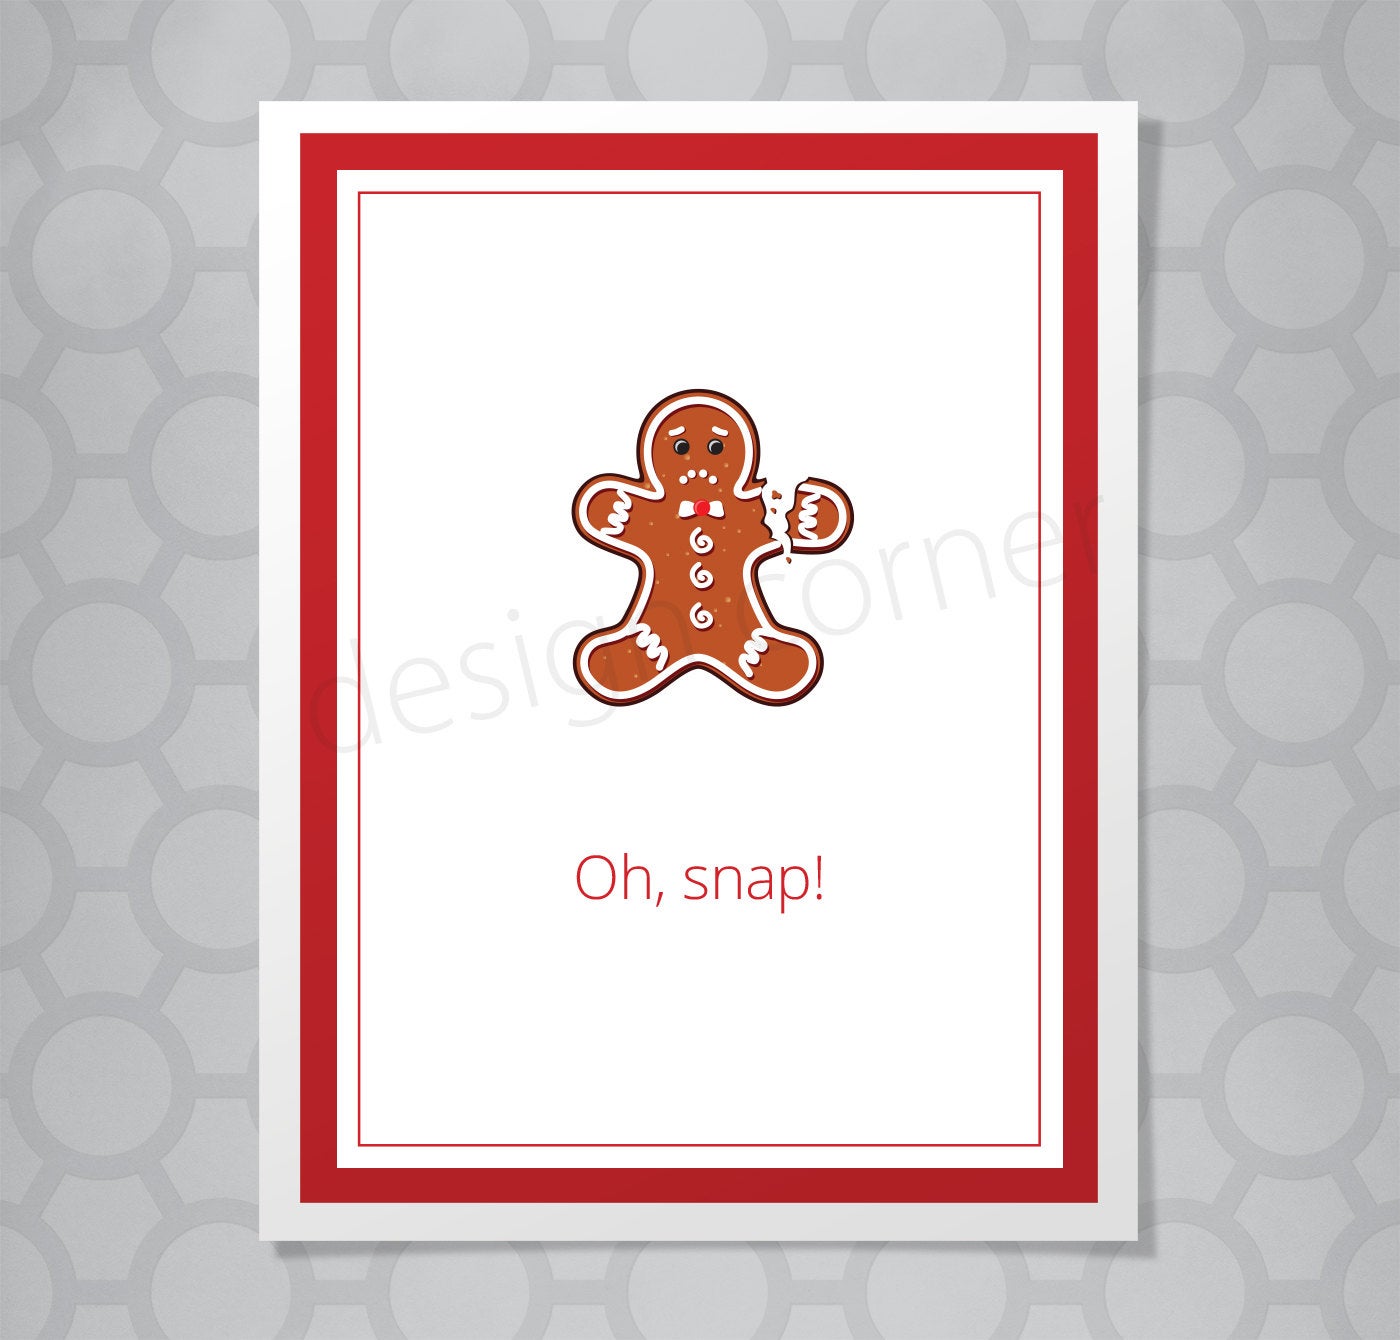 Illustration of gingerbread man with broken arm on a christmas card with caption Oh snap!